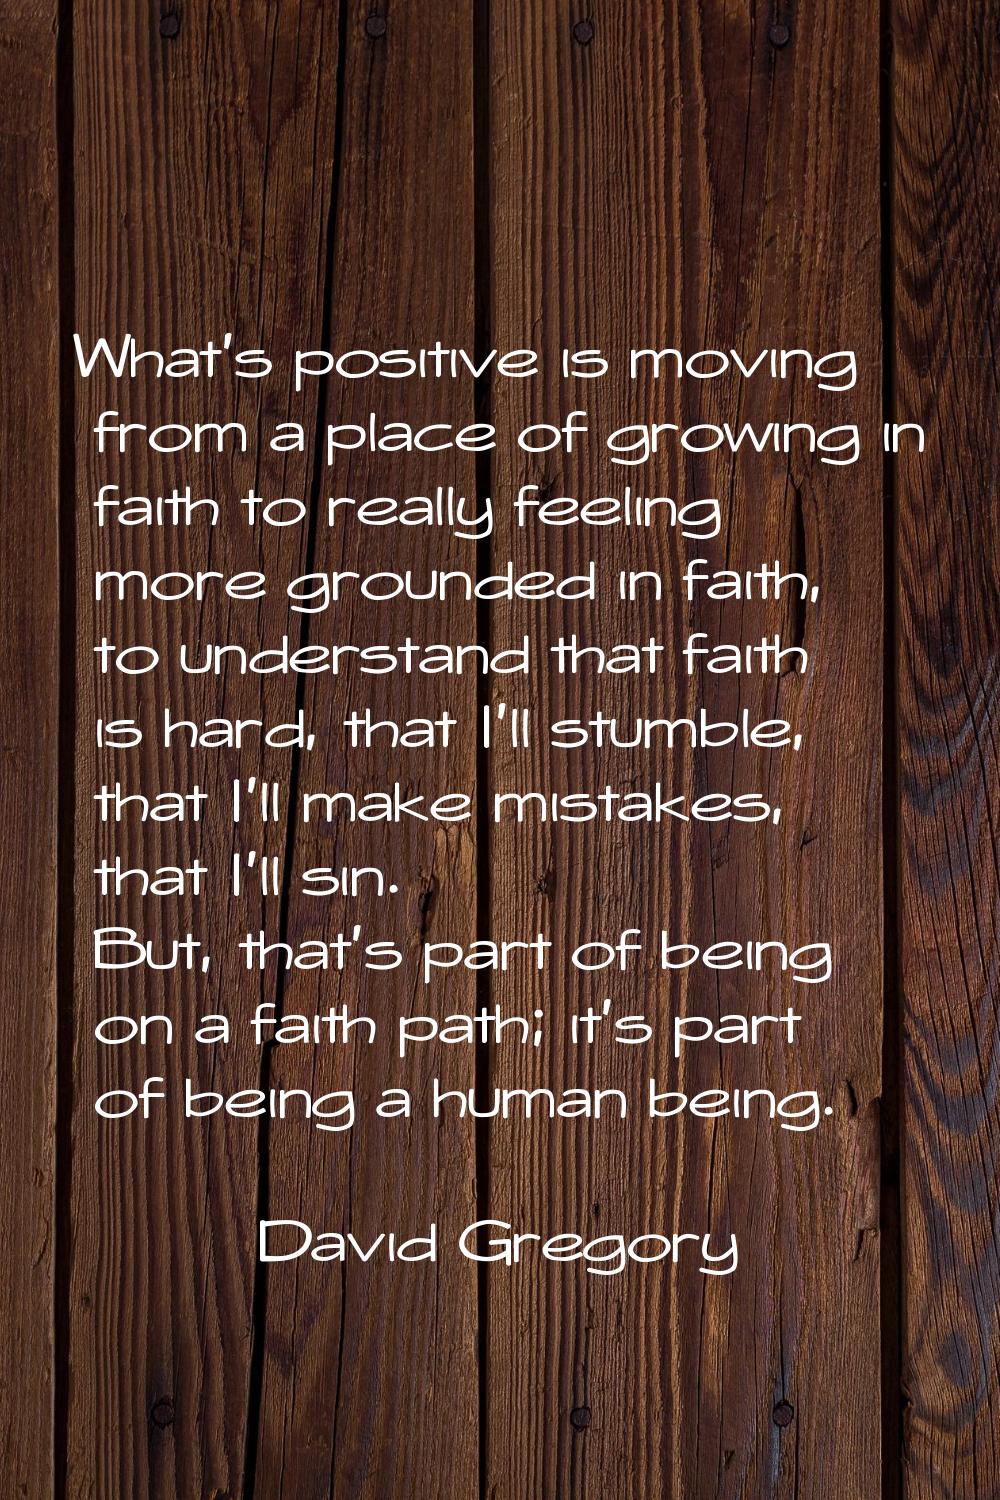 What's positive is moving from a place of growing in faith to really feeling more grounded in faith